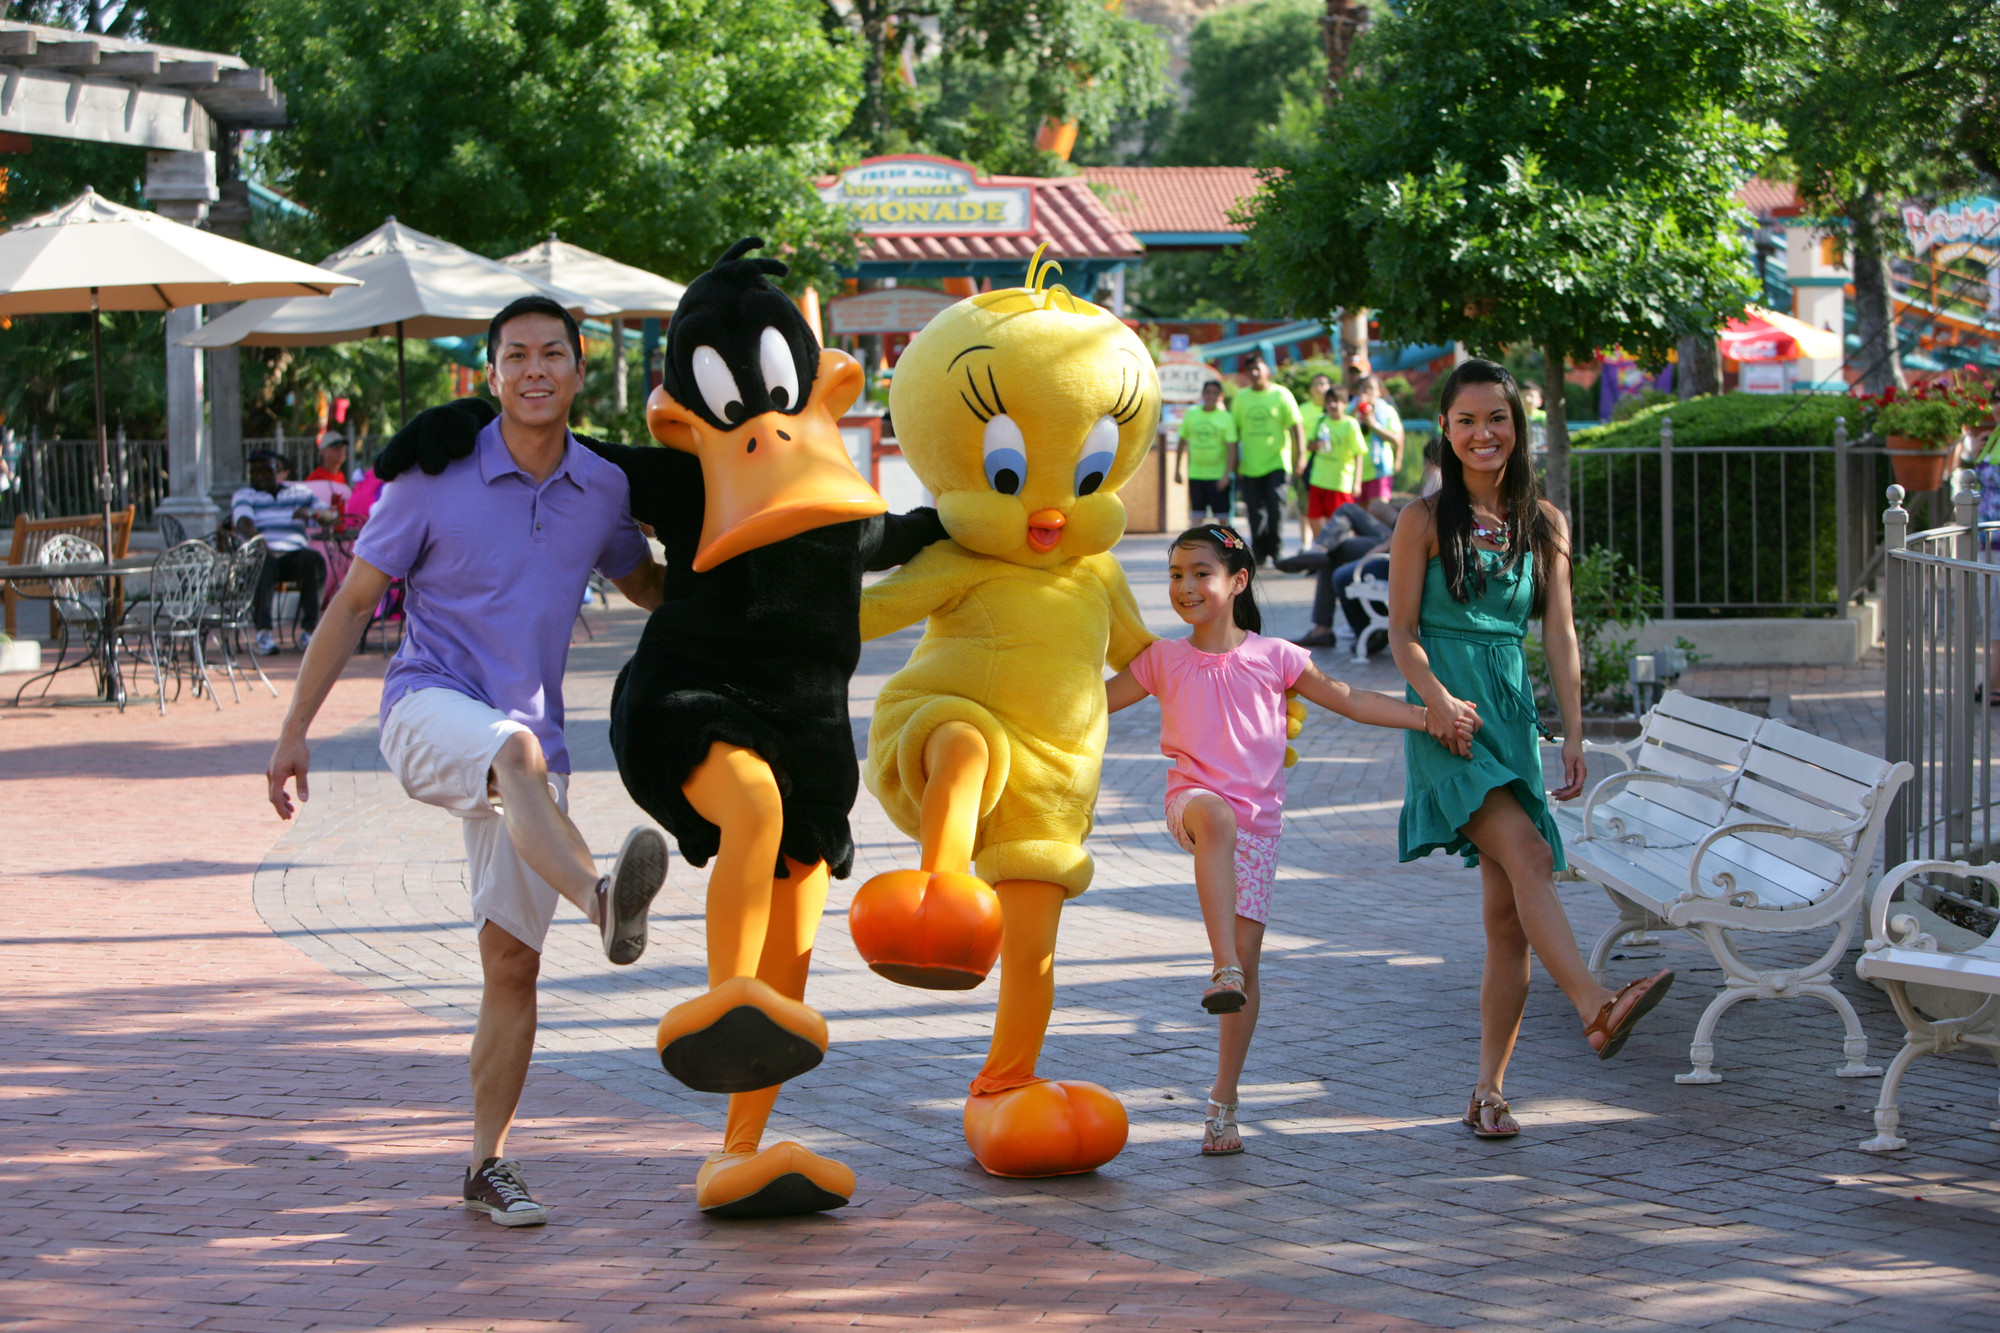 A family walking with characters at Six Flags theme park